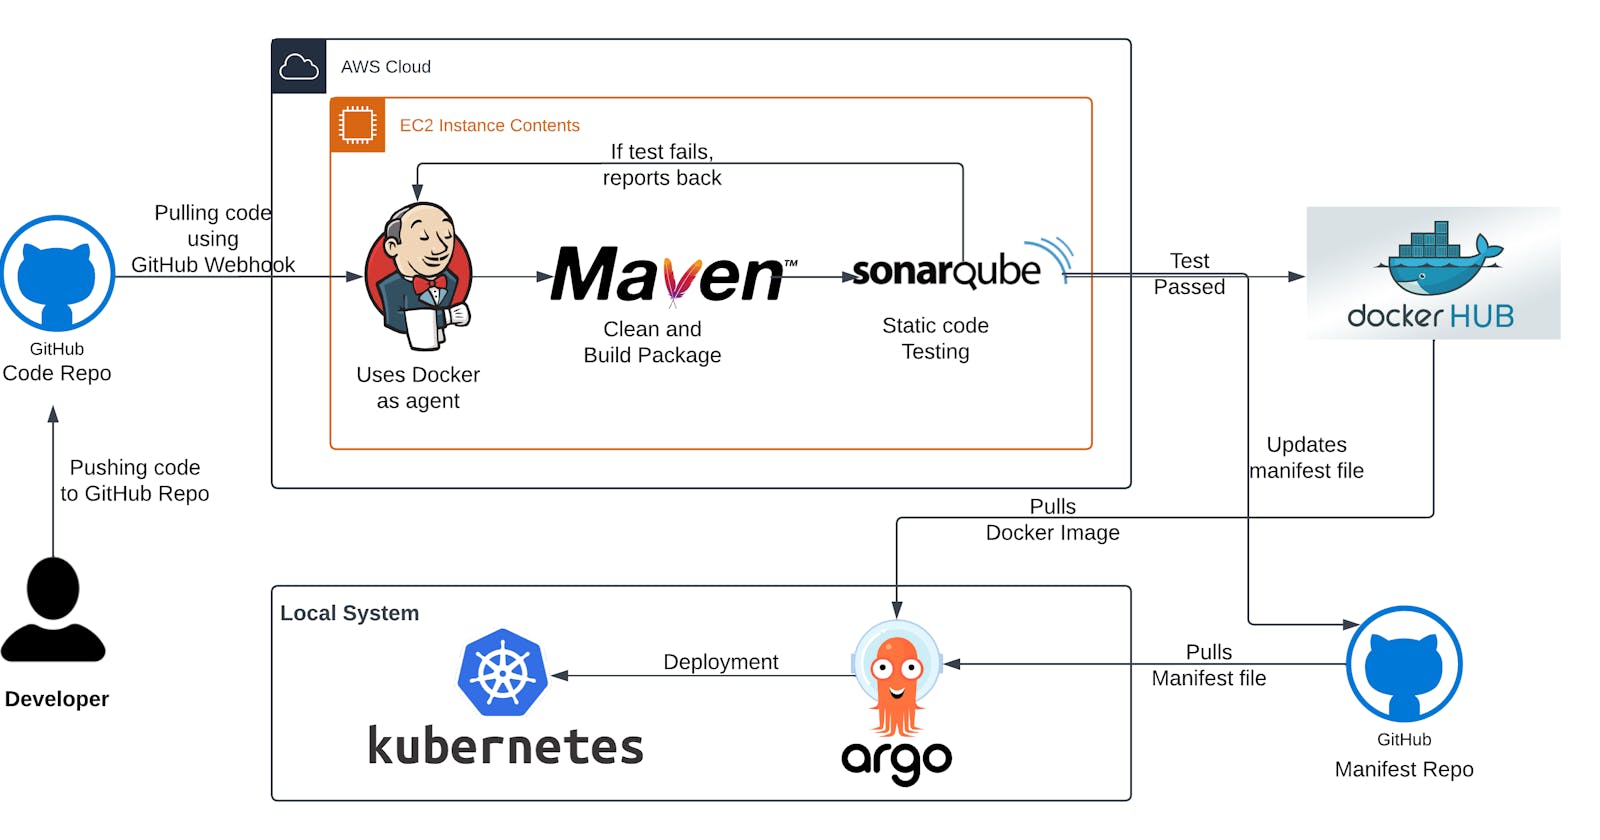 Building an End-to-End CI/CD Pipeline with AWS, Jenkins, Docker, SonarQube, ArgoCD and Kubernetes